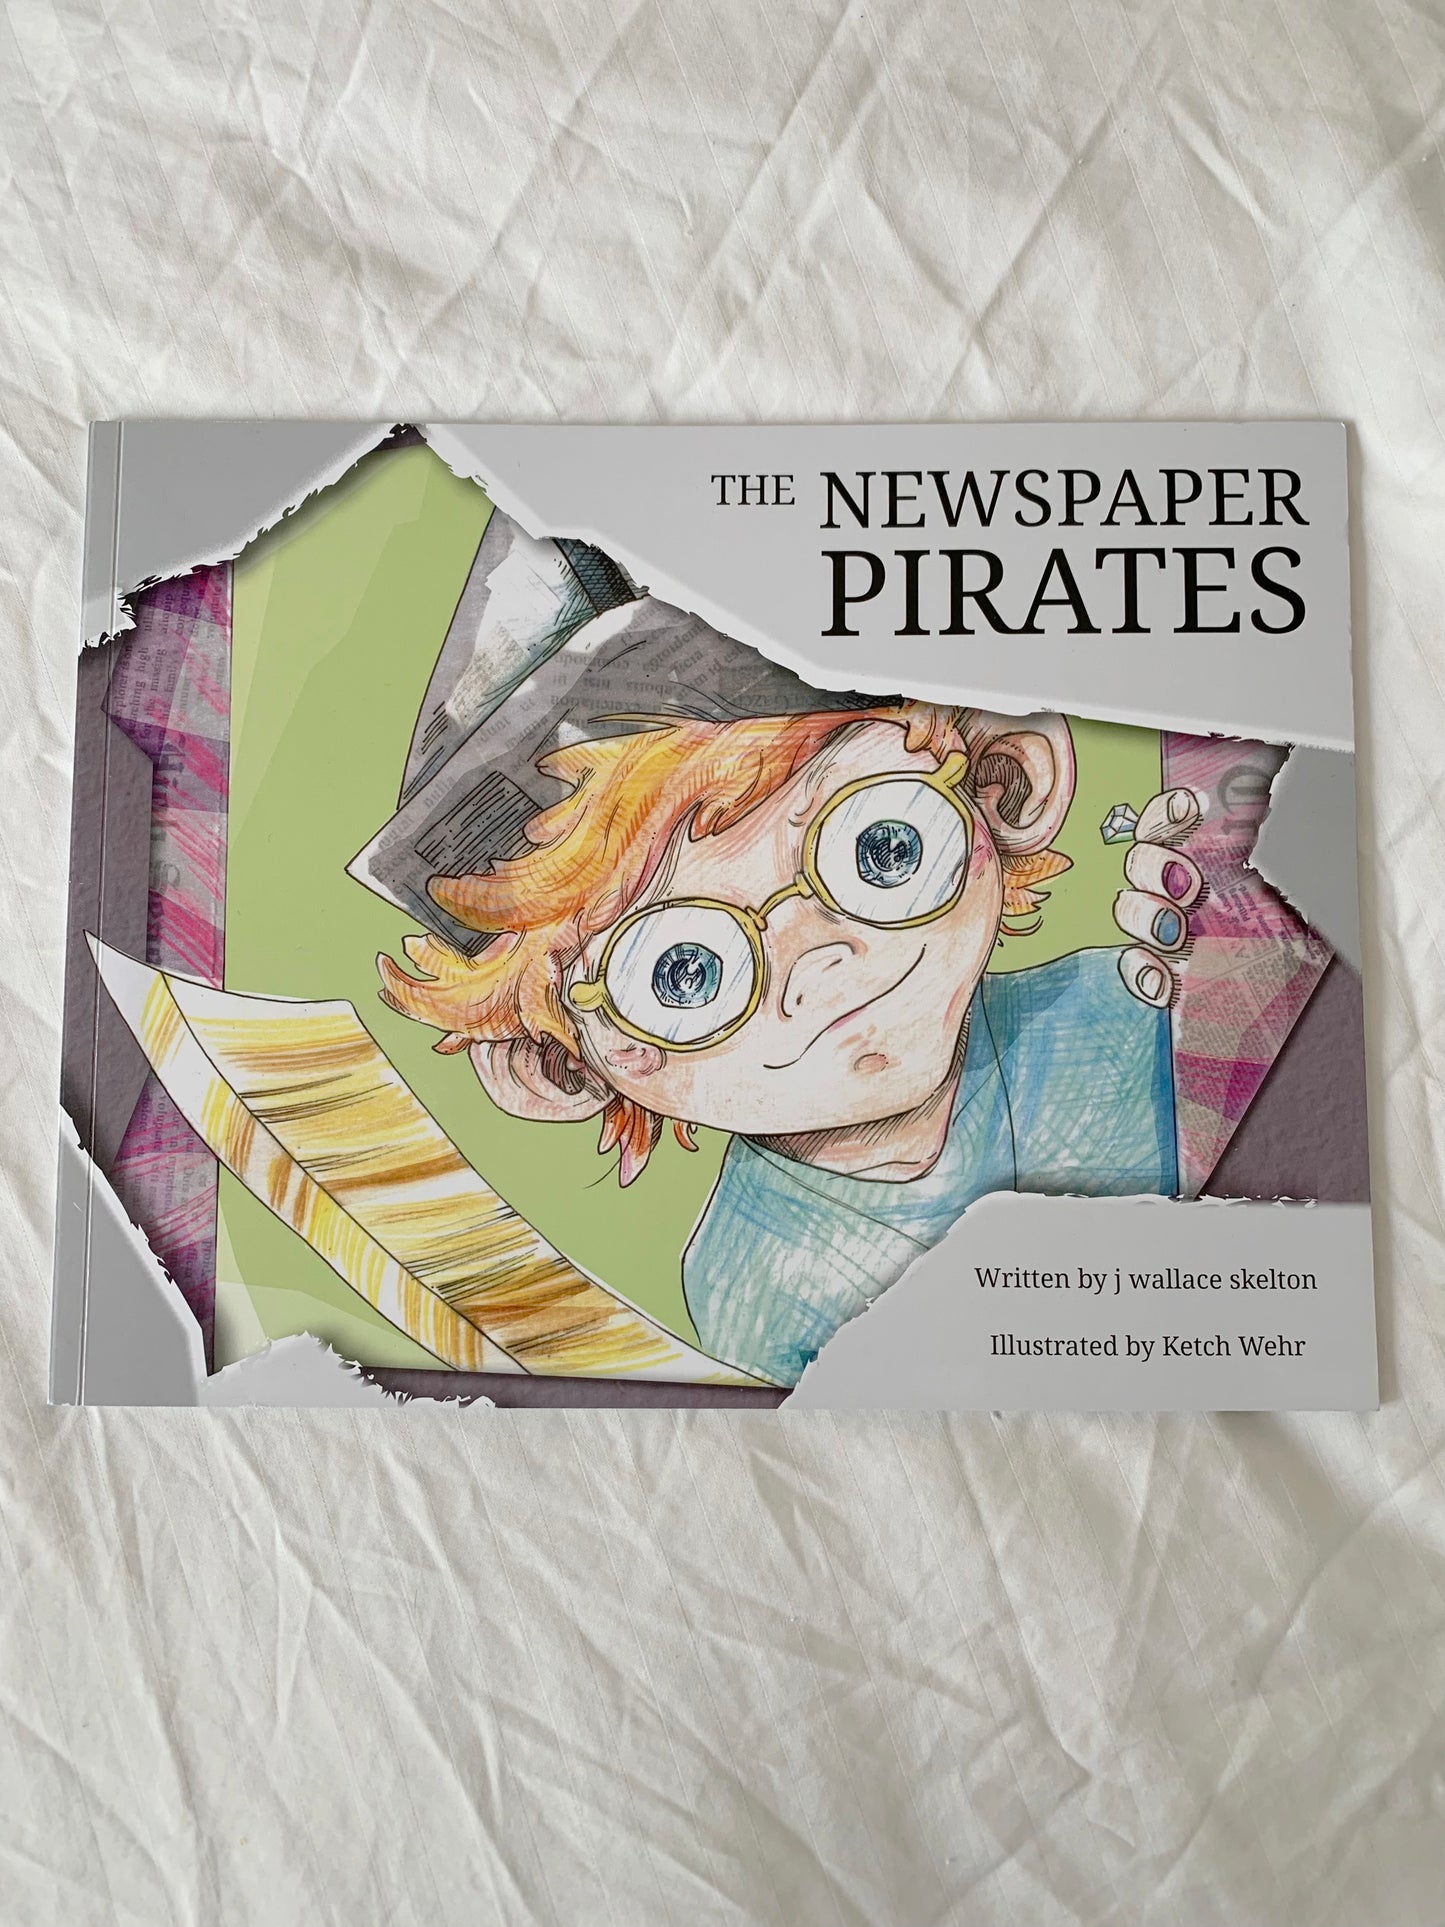 The Newspaper Pirates by j wallace skelton